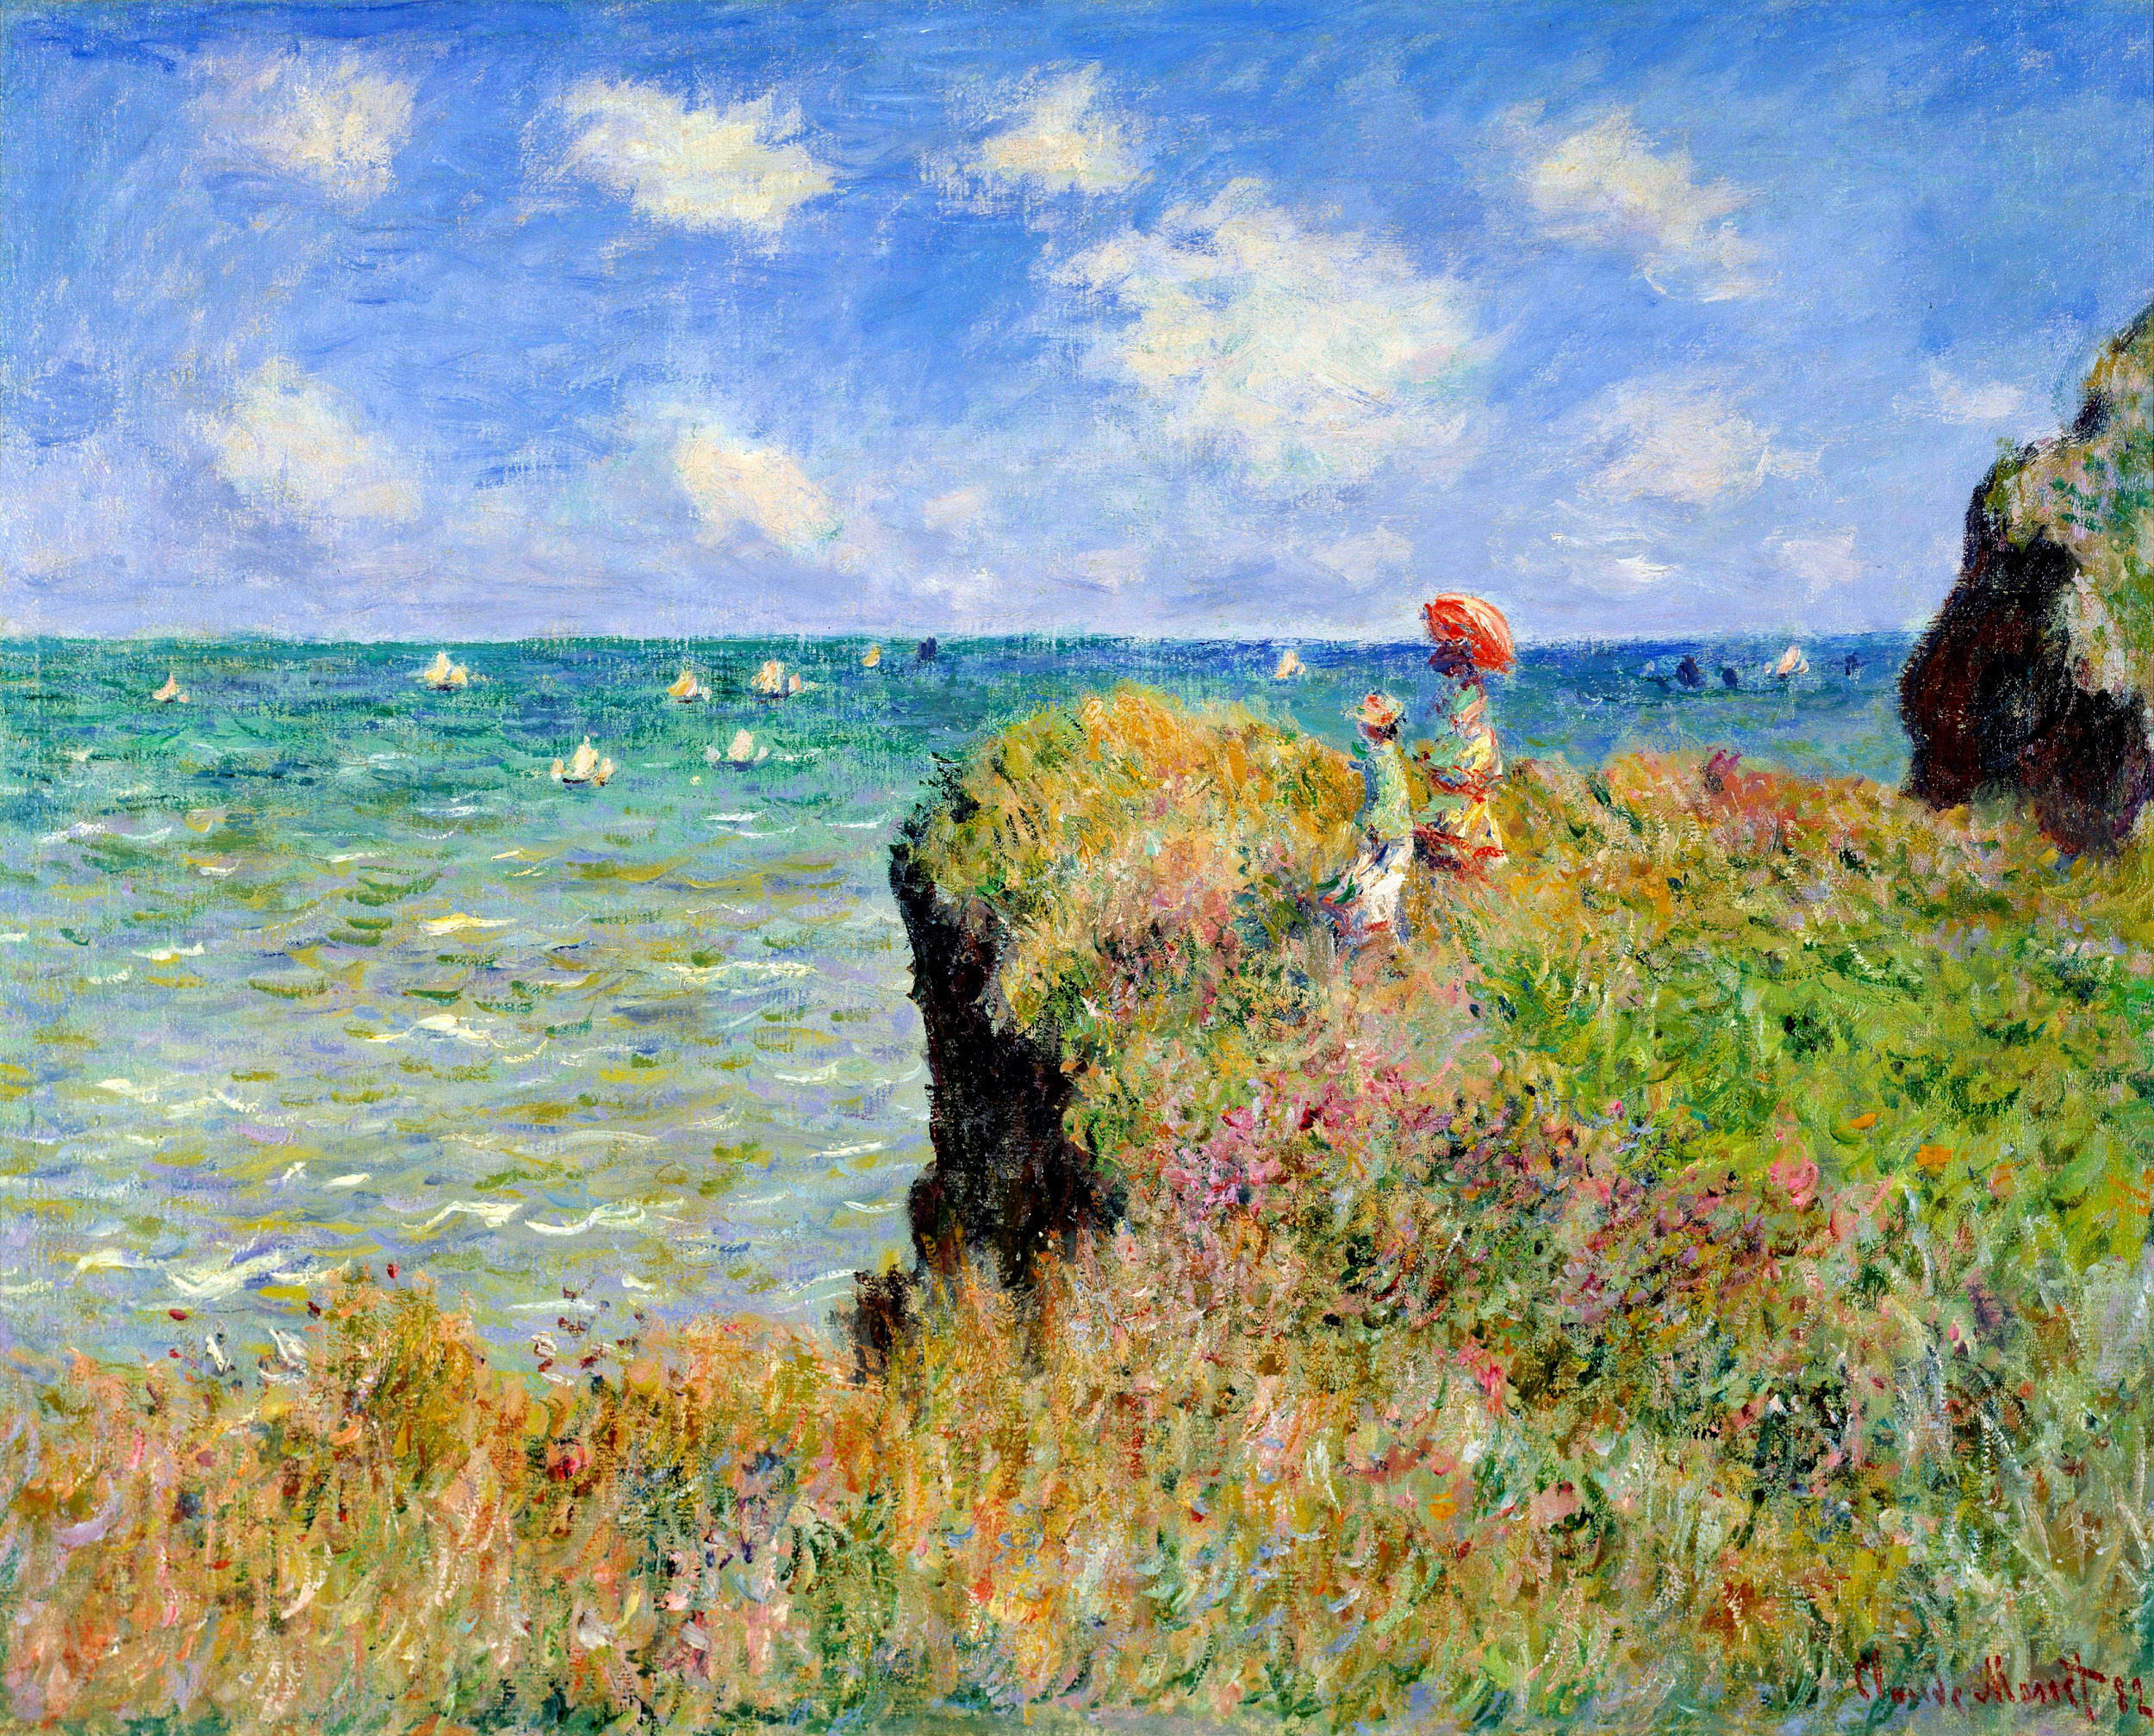 Spaziergang auf der Felskuppe in Pourville by Claude Monet - 1882 - 66.5 × 82.3 cm Art Institute of Chicago